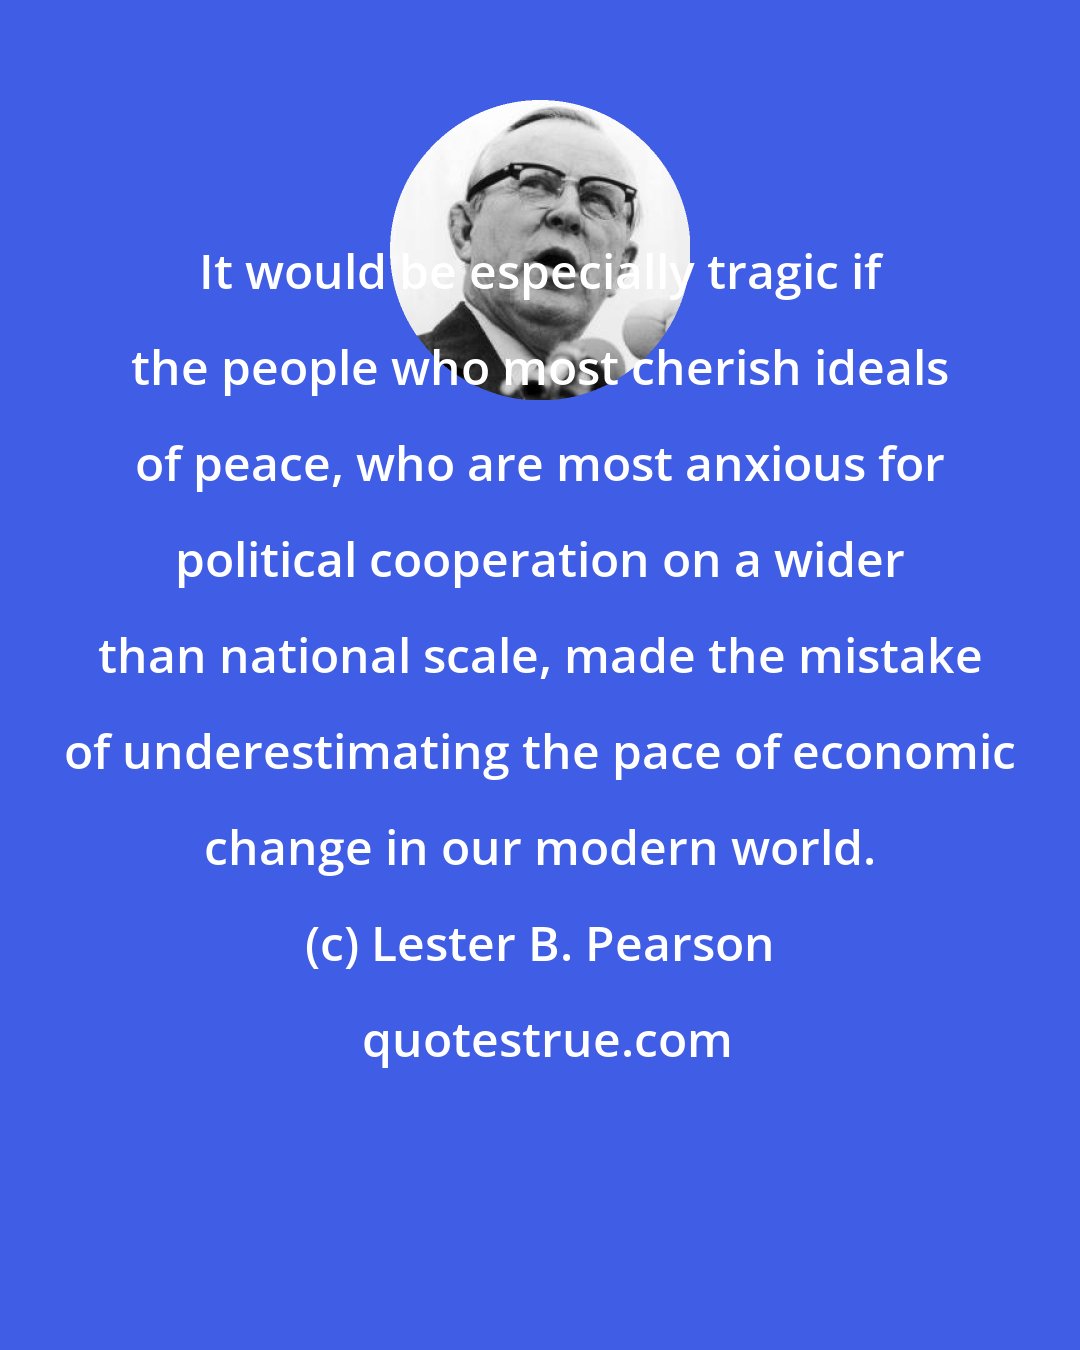 Lester B. Pearson: It would be especially tragic if the people who most cherish ideals of peace, who are most anxious for political cooperation on a wider than national scale, made the mistake of underestimating the pace of economic change in our modern world.